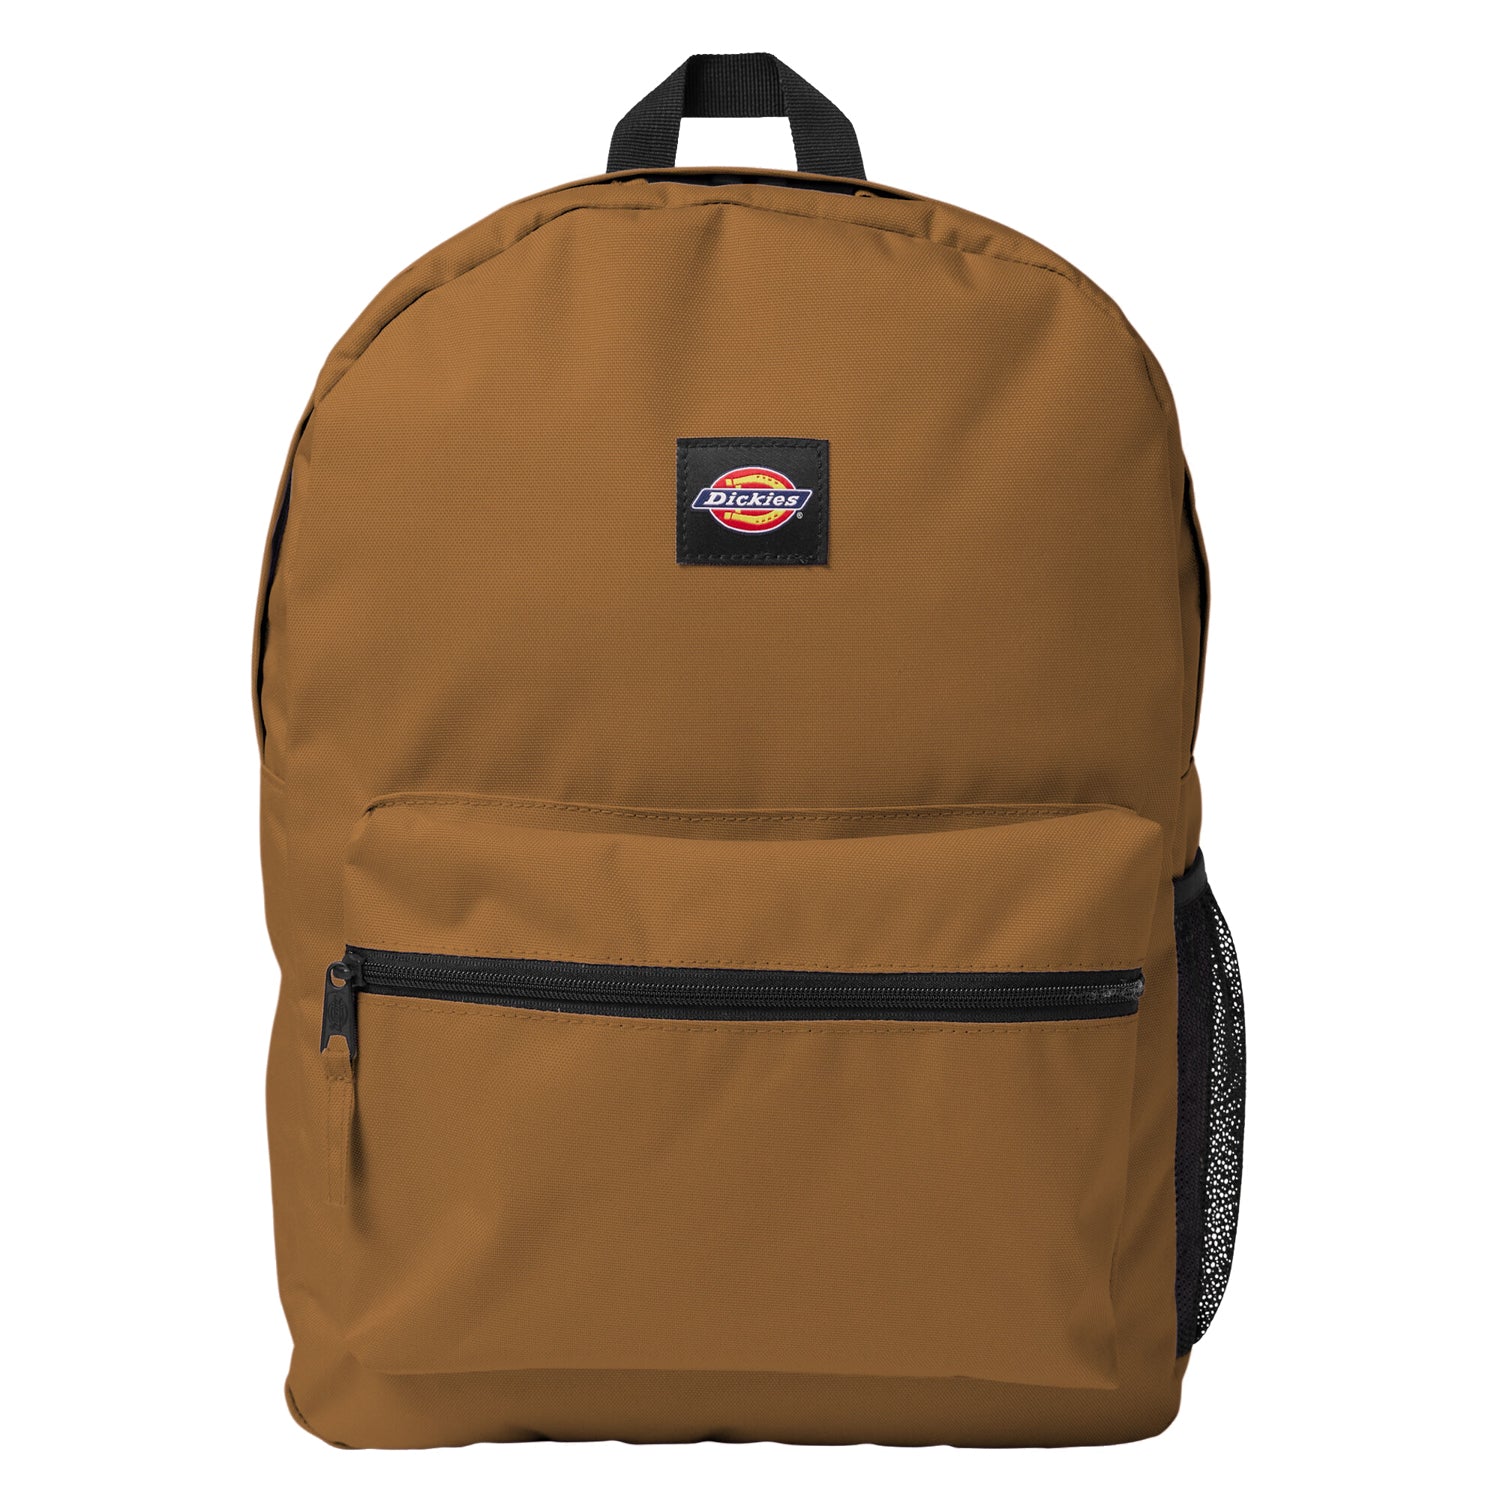 Woven Basic Backpack - Brown Duck